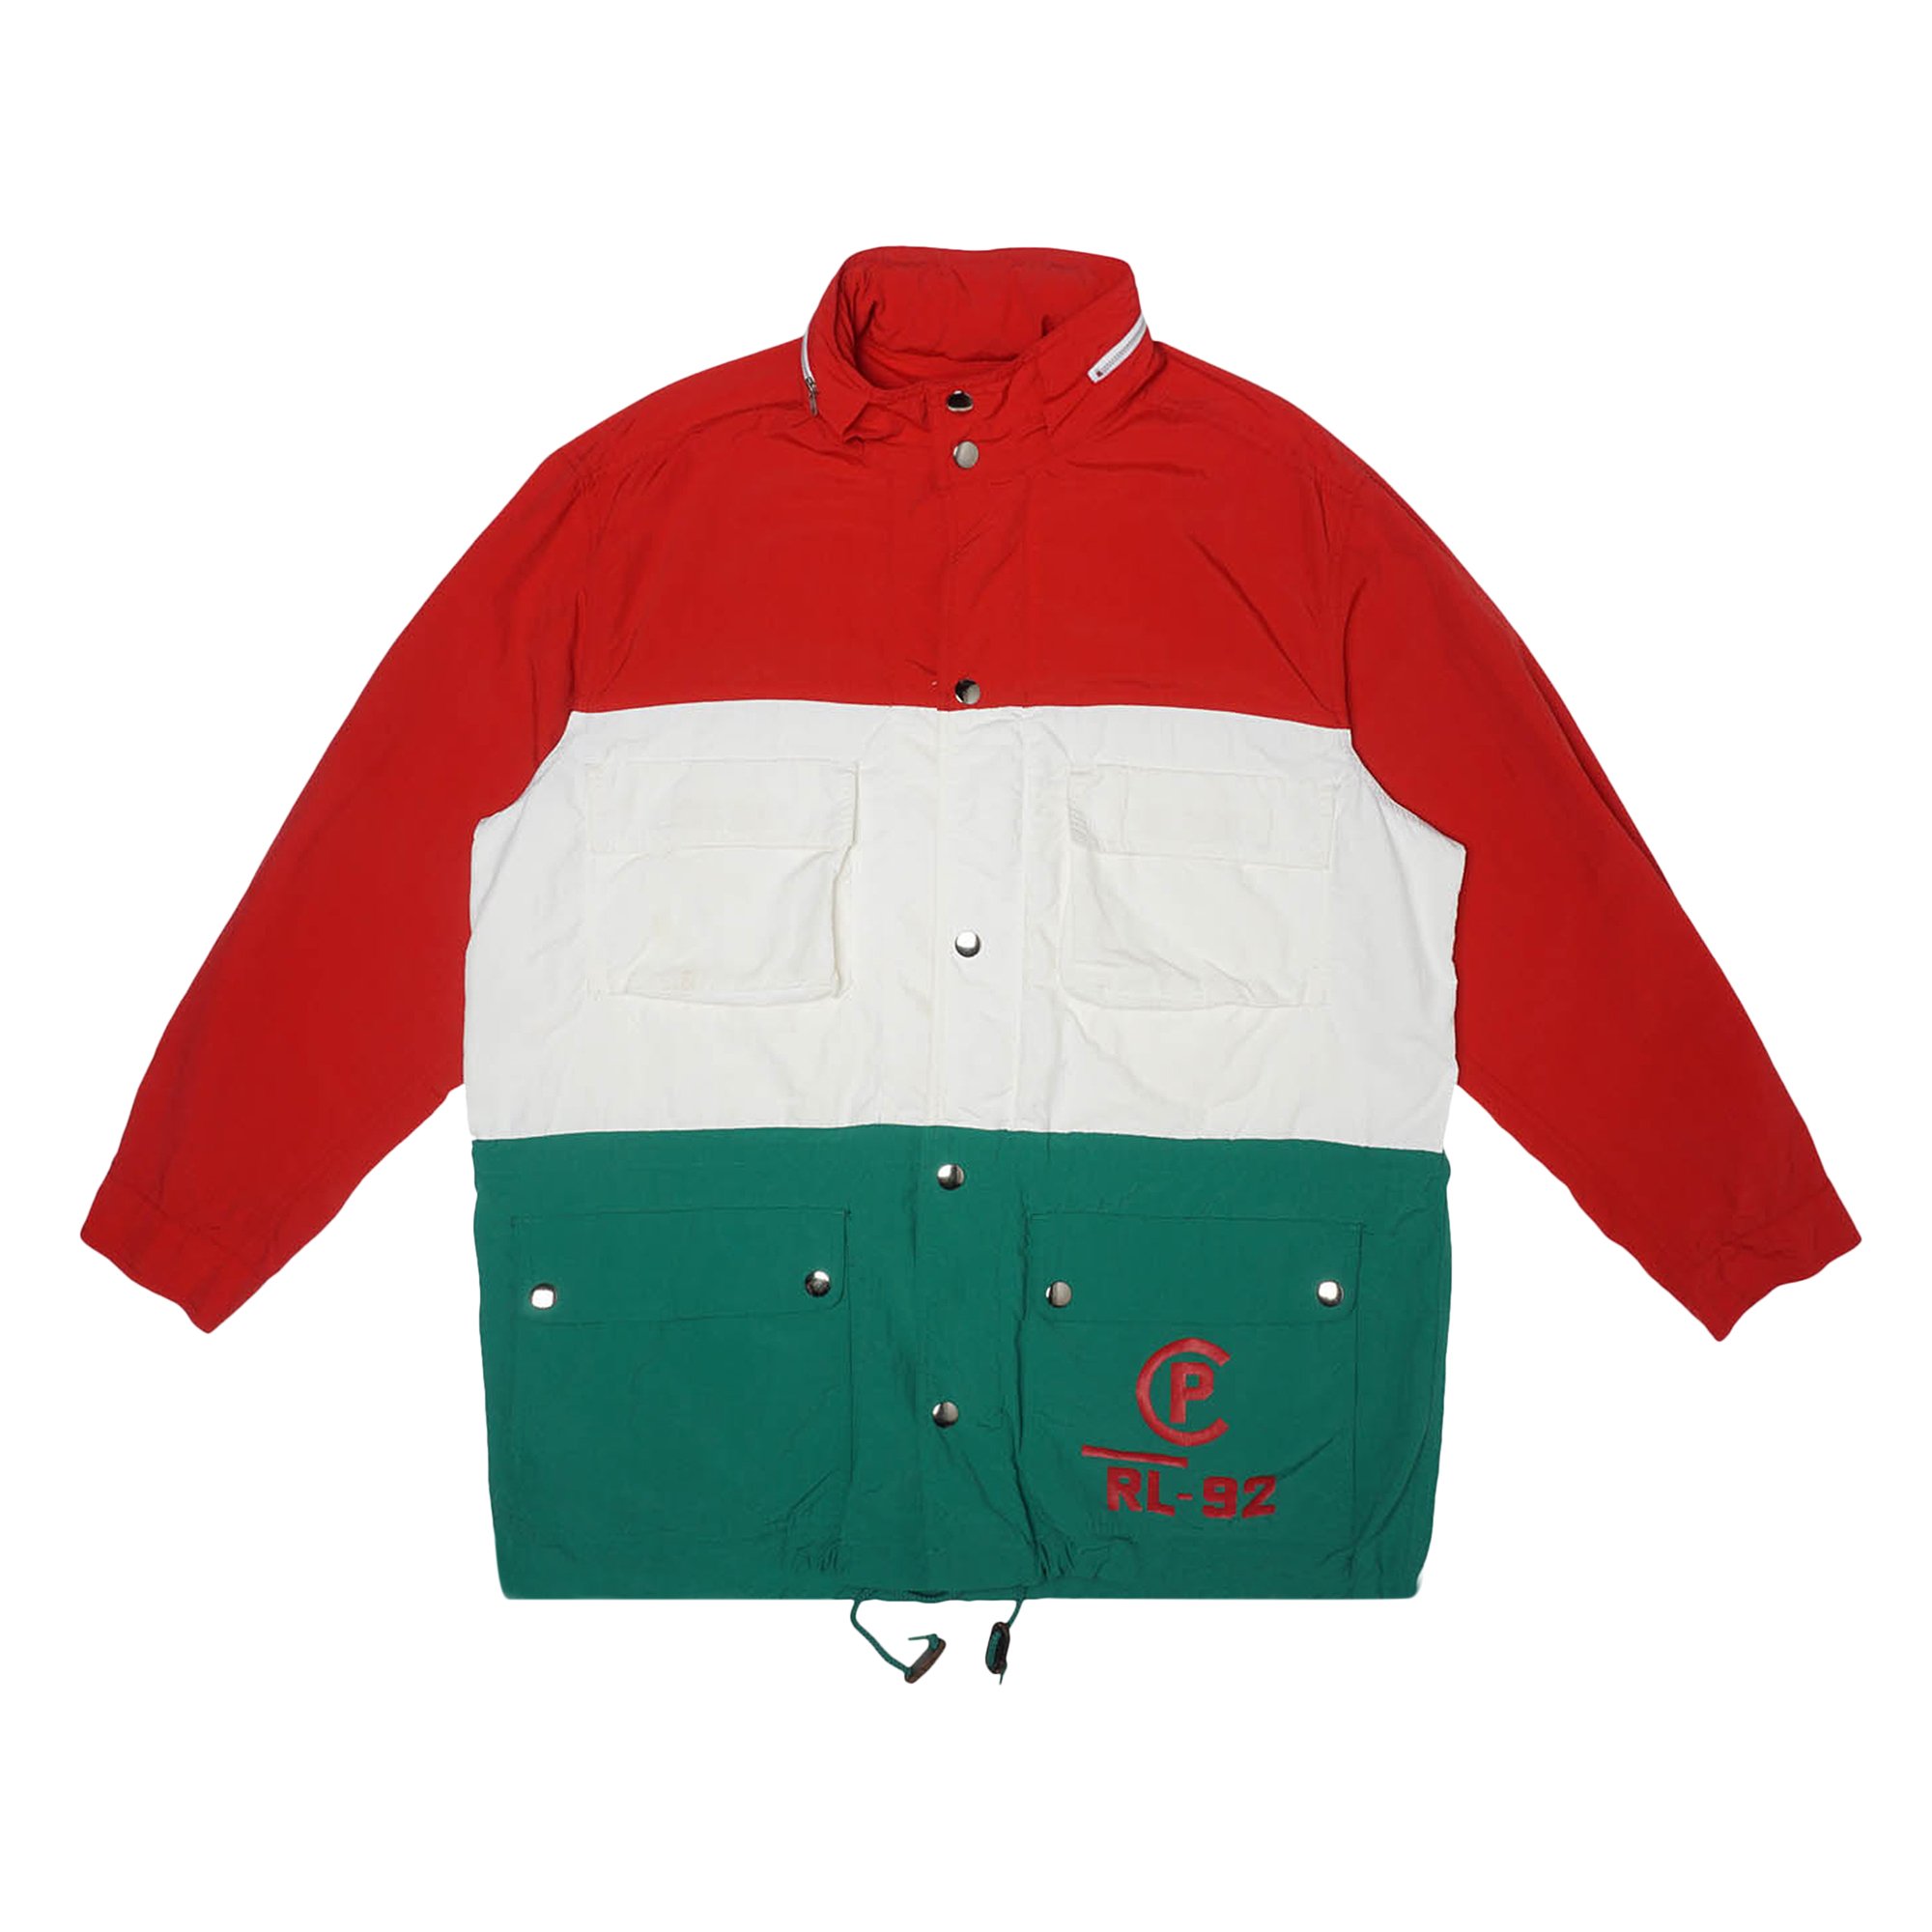 Pre-Owned Polo by Ralph Lauren Vintage Circa 1990's CP-92 Tri